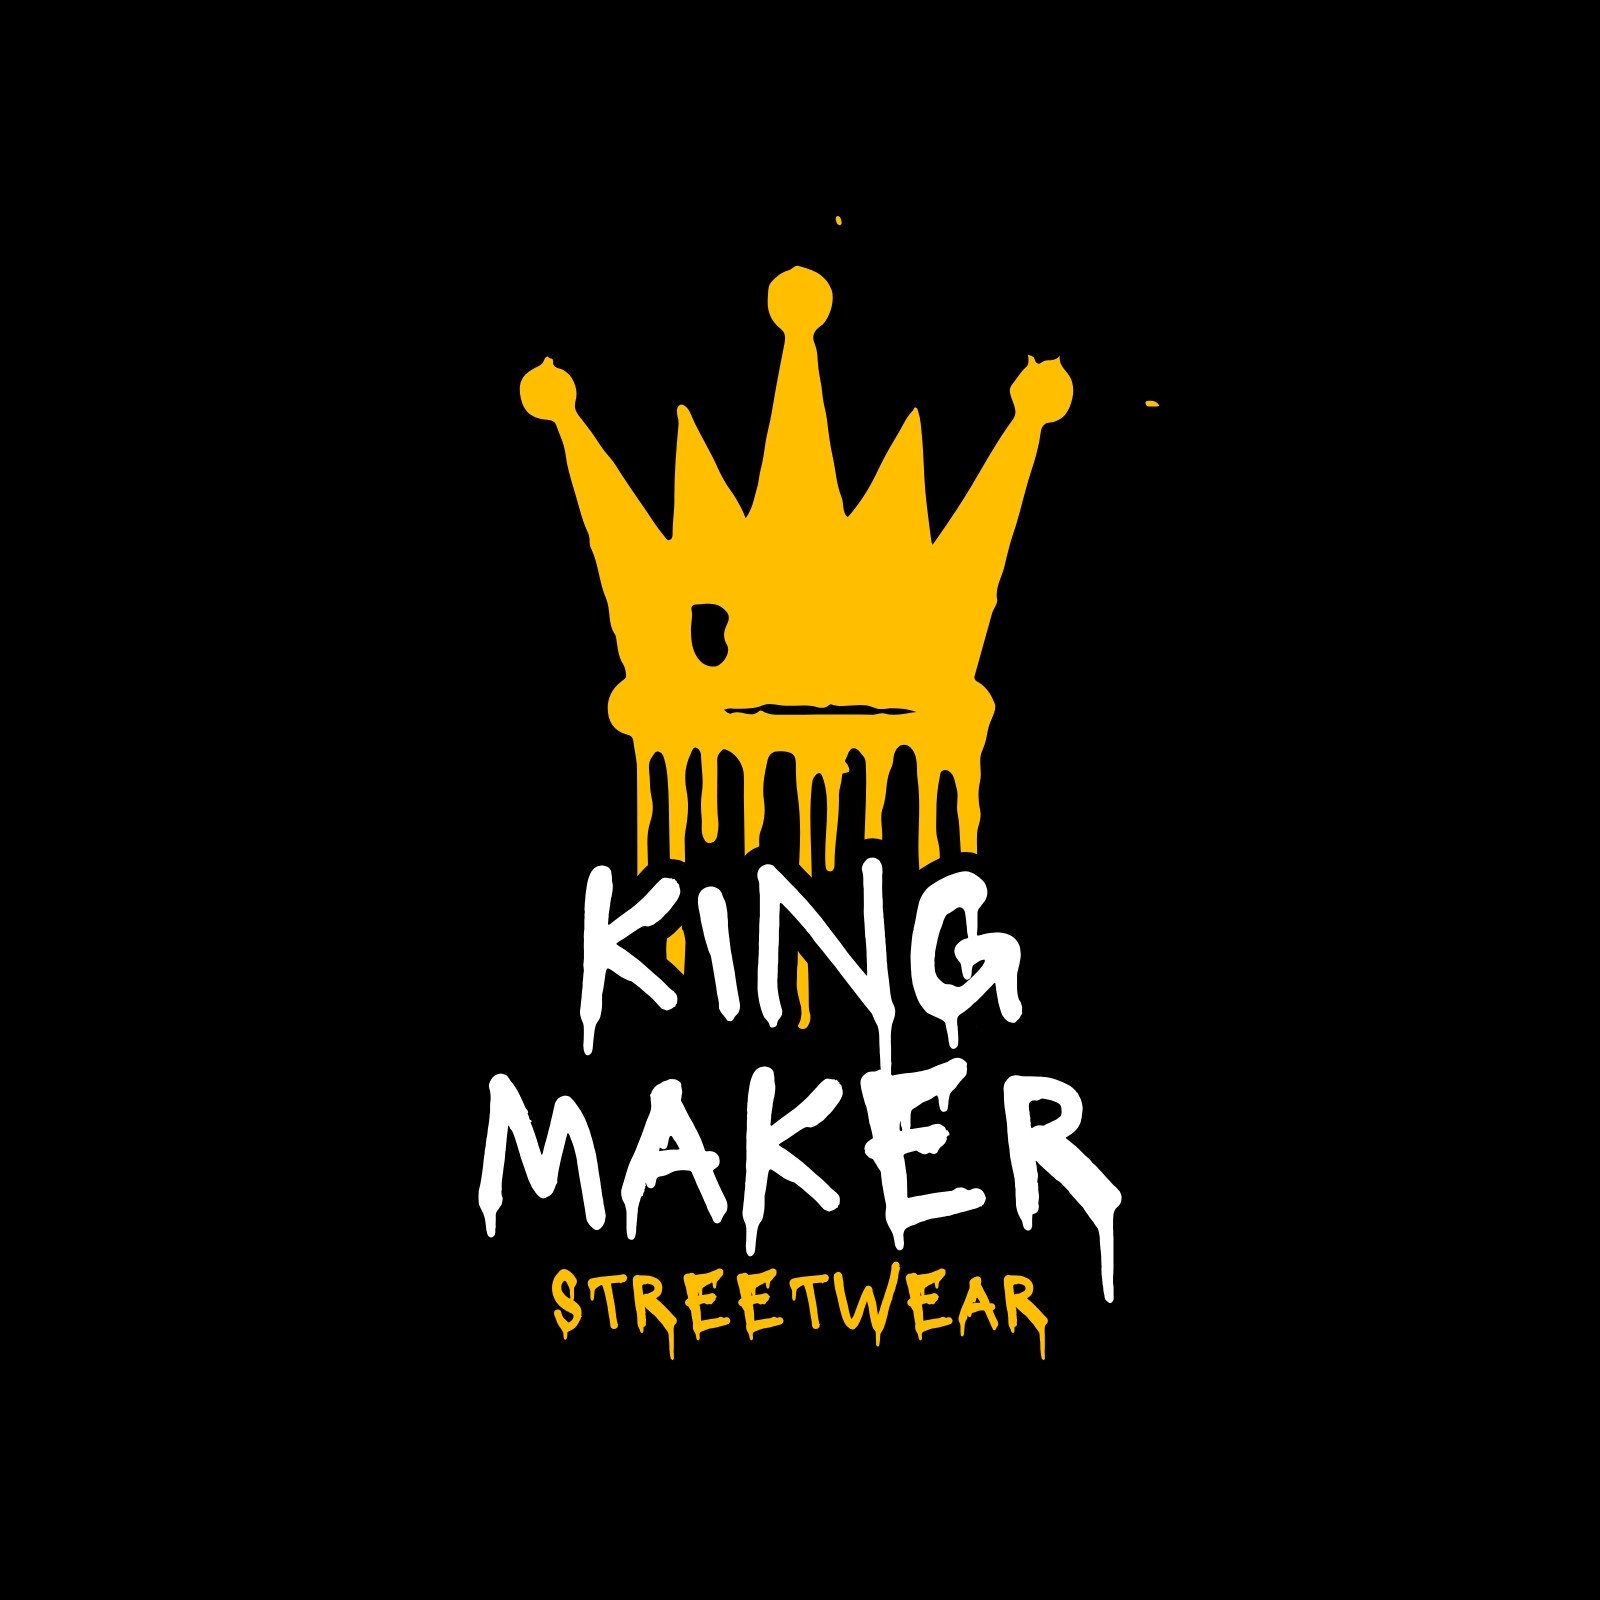 Kingmaker - Free abstract outline crown logo - Roven Logos